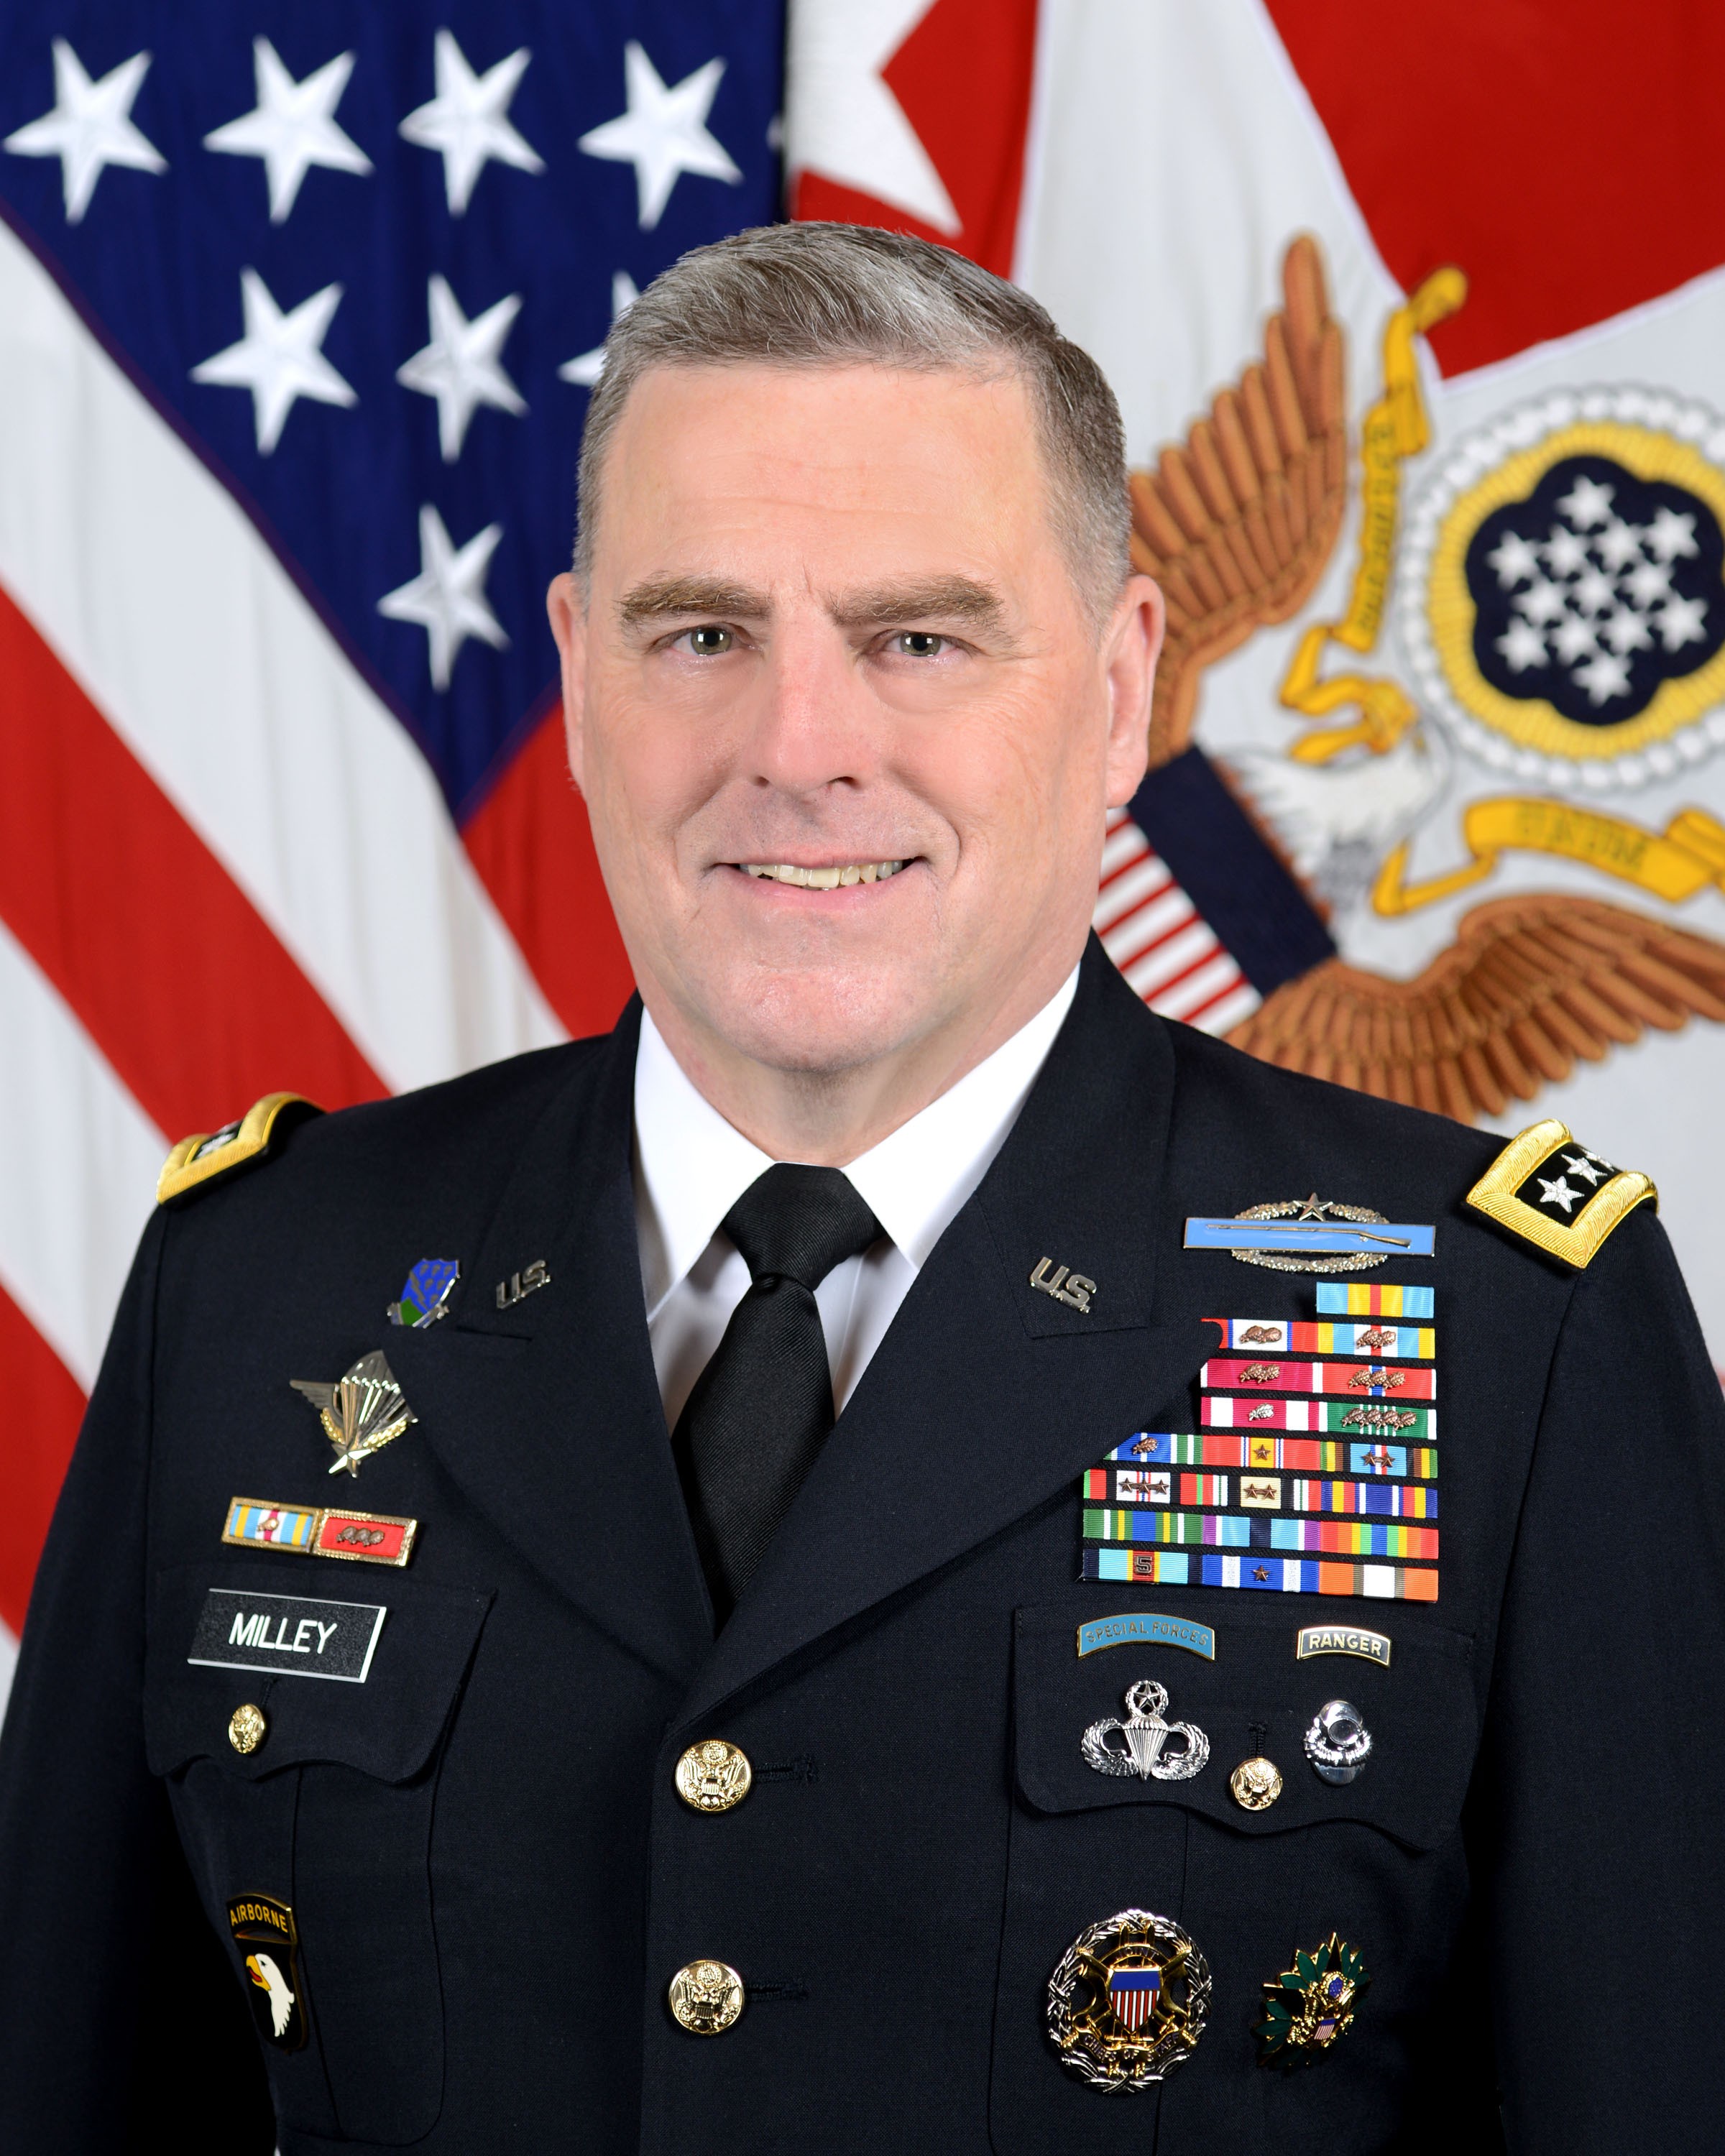 get-to-know-the-new-chief-of-staff-of-the-army-general-mark-a-milley